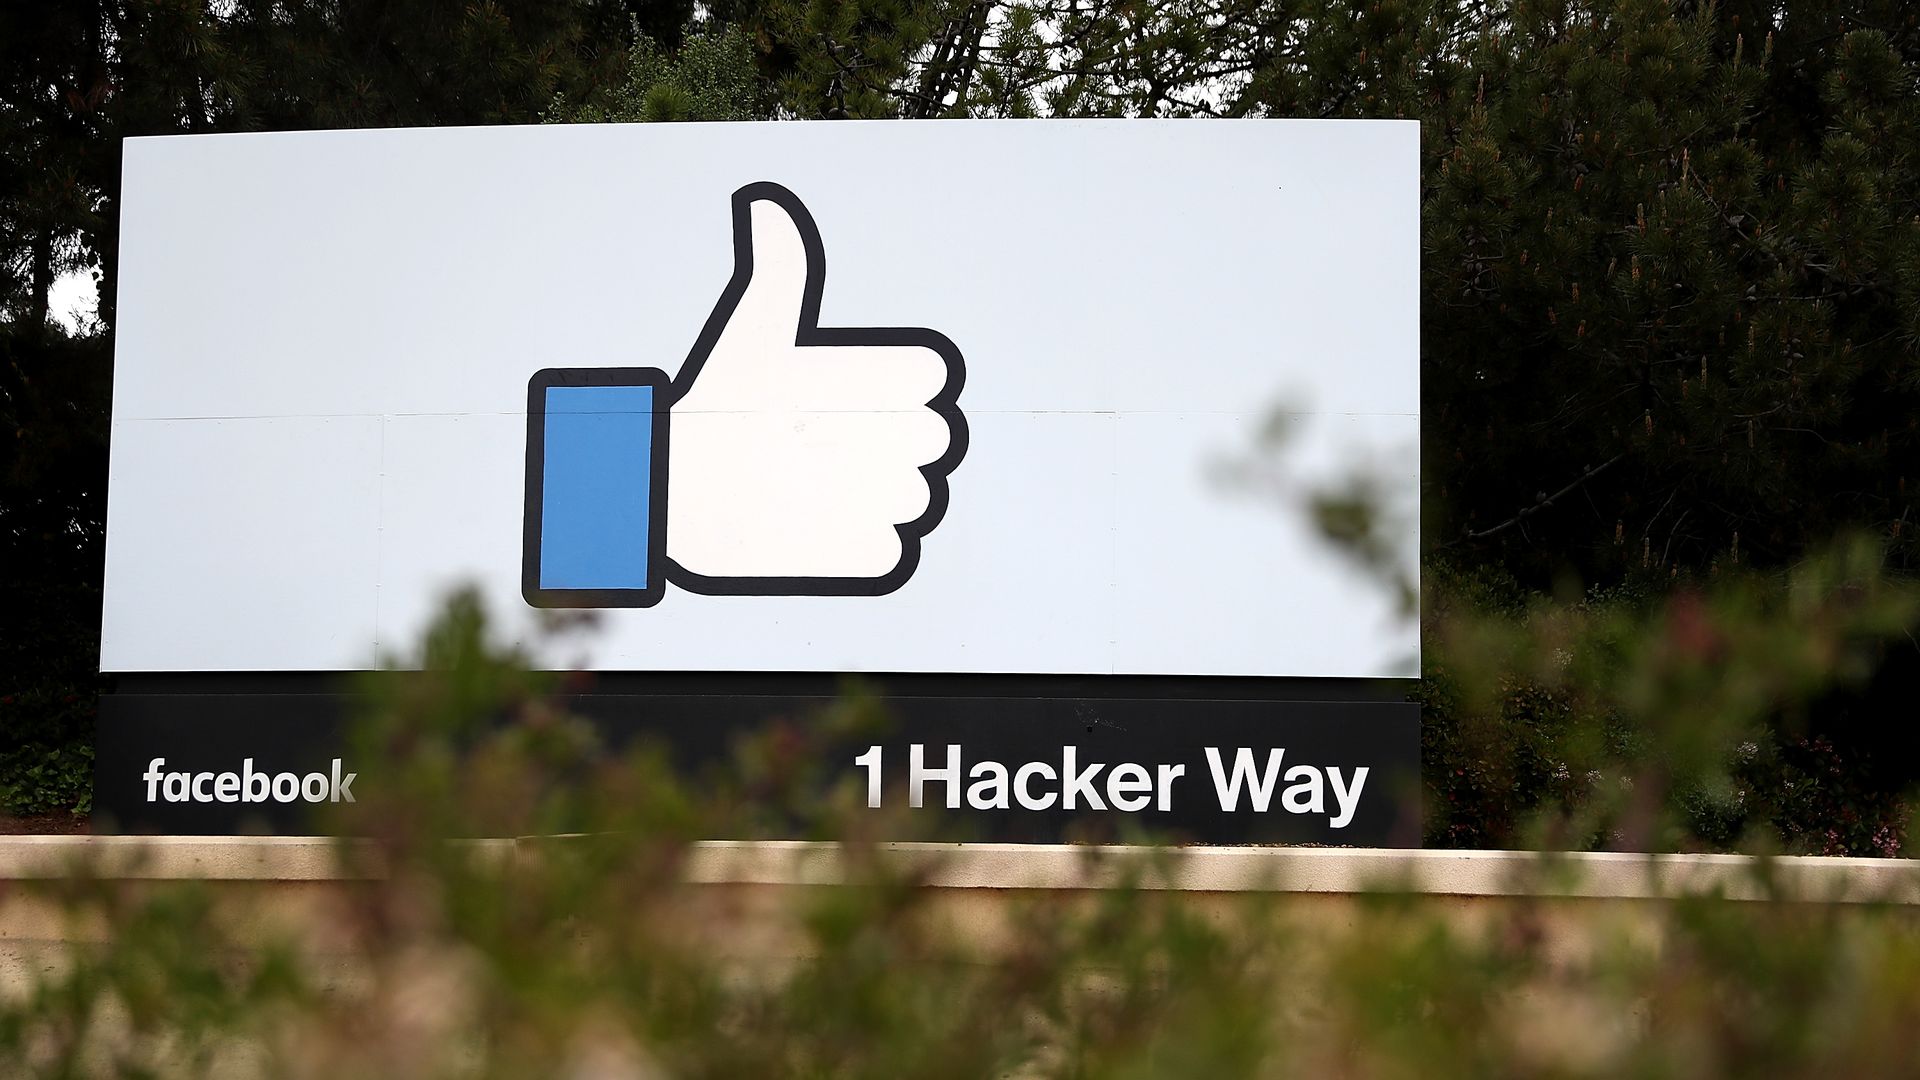 The thumbs up sign outside Facebook HQ